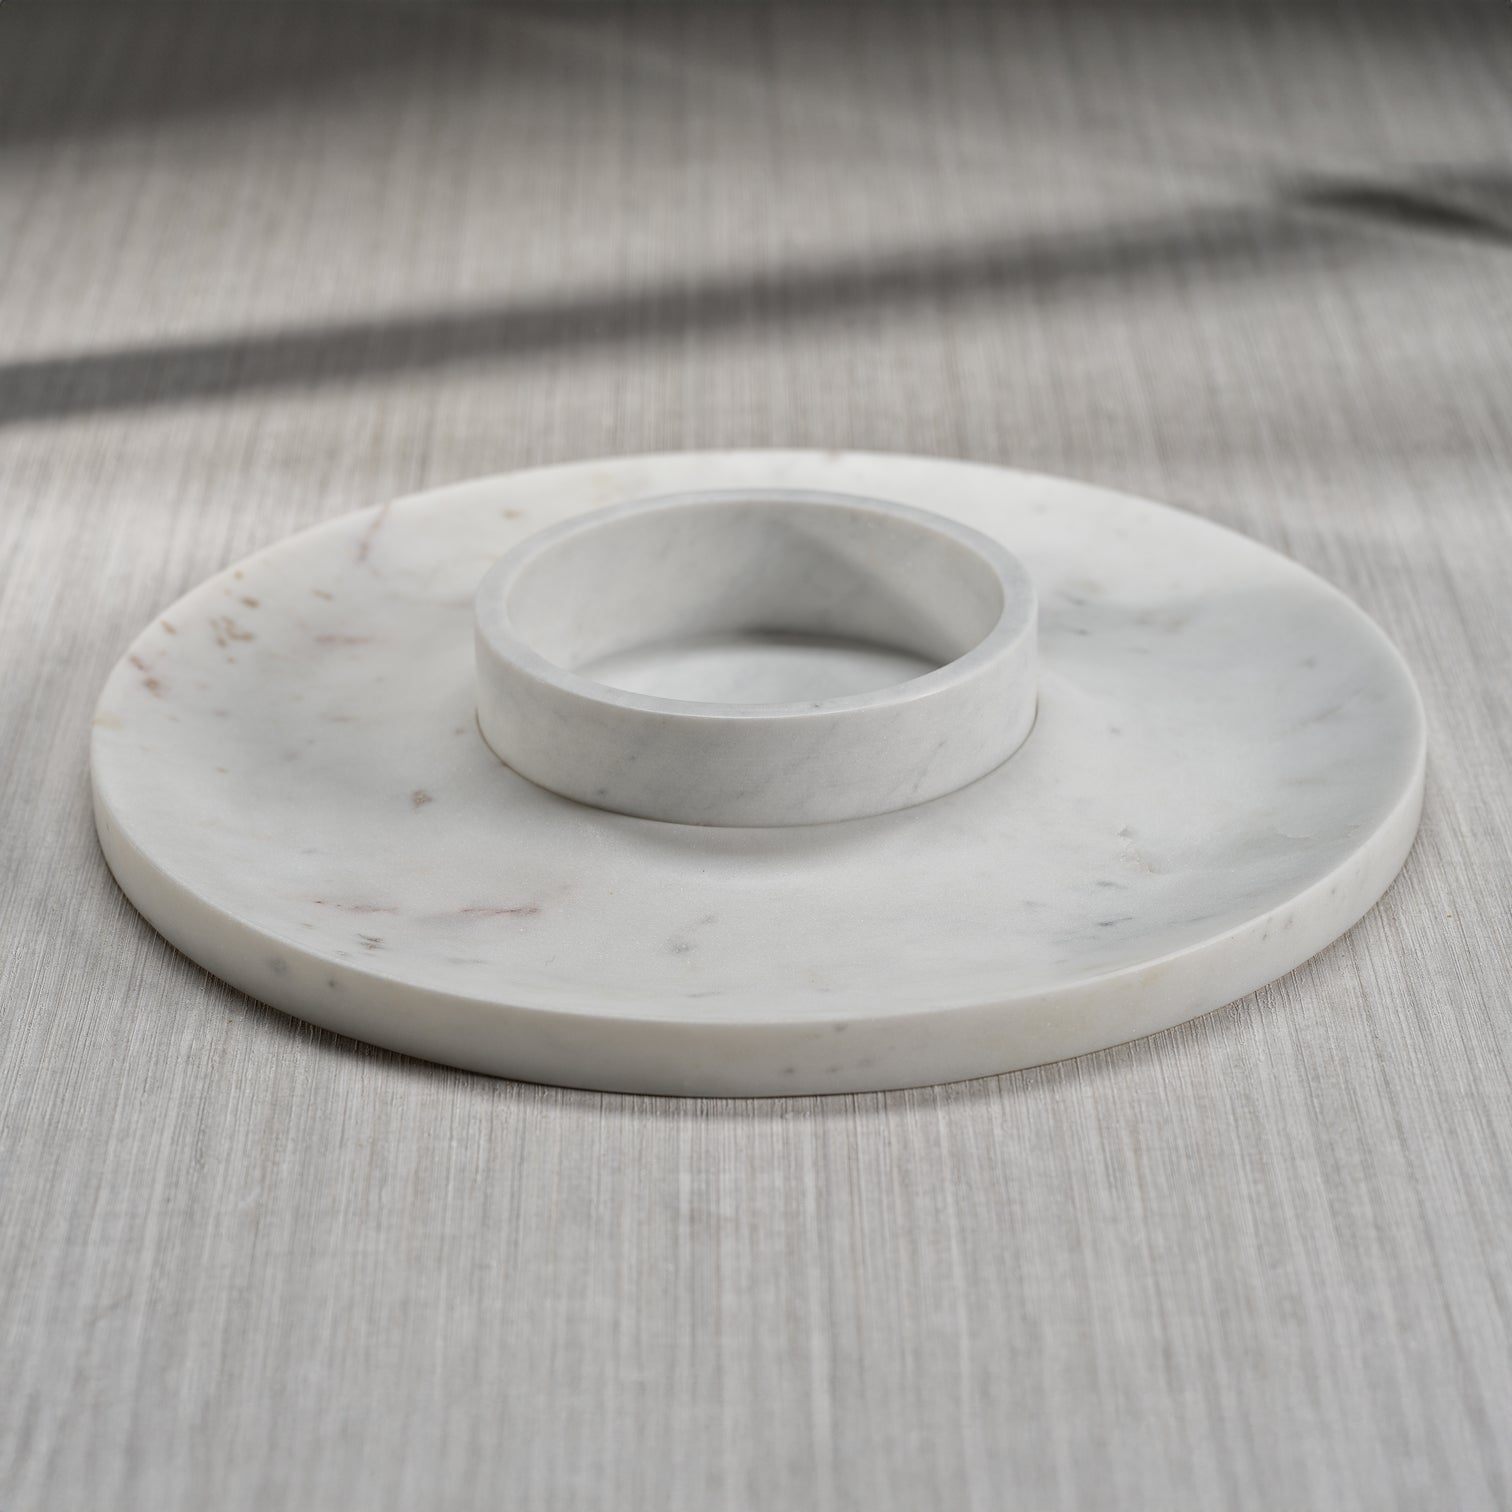 Marbella Marble Chip and Dip Server